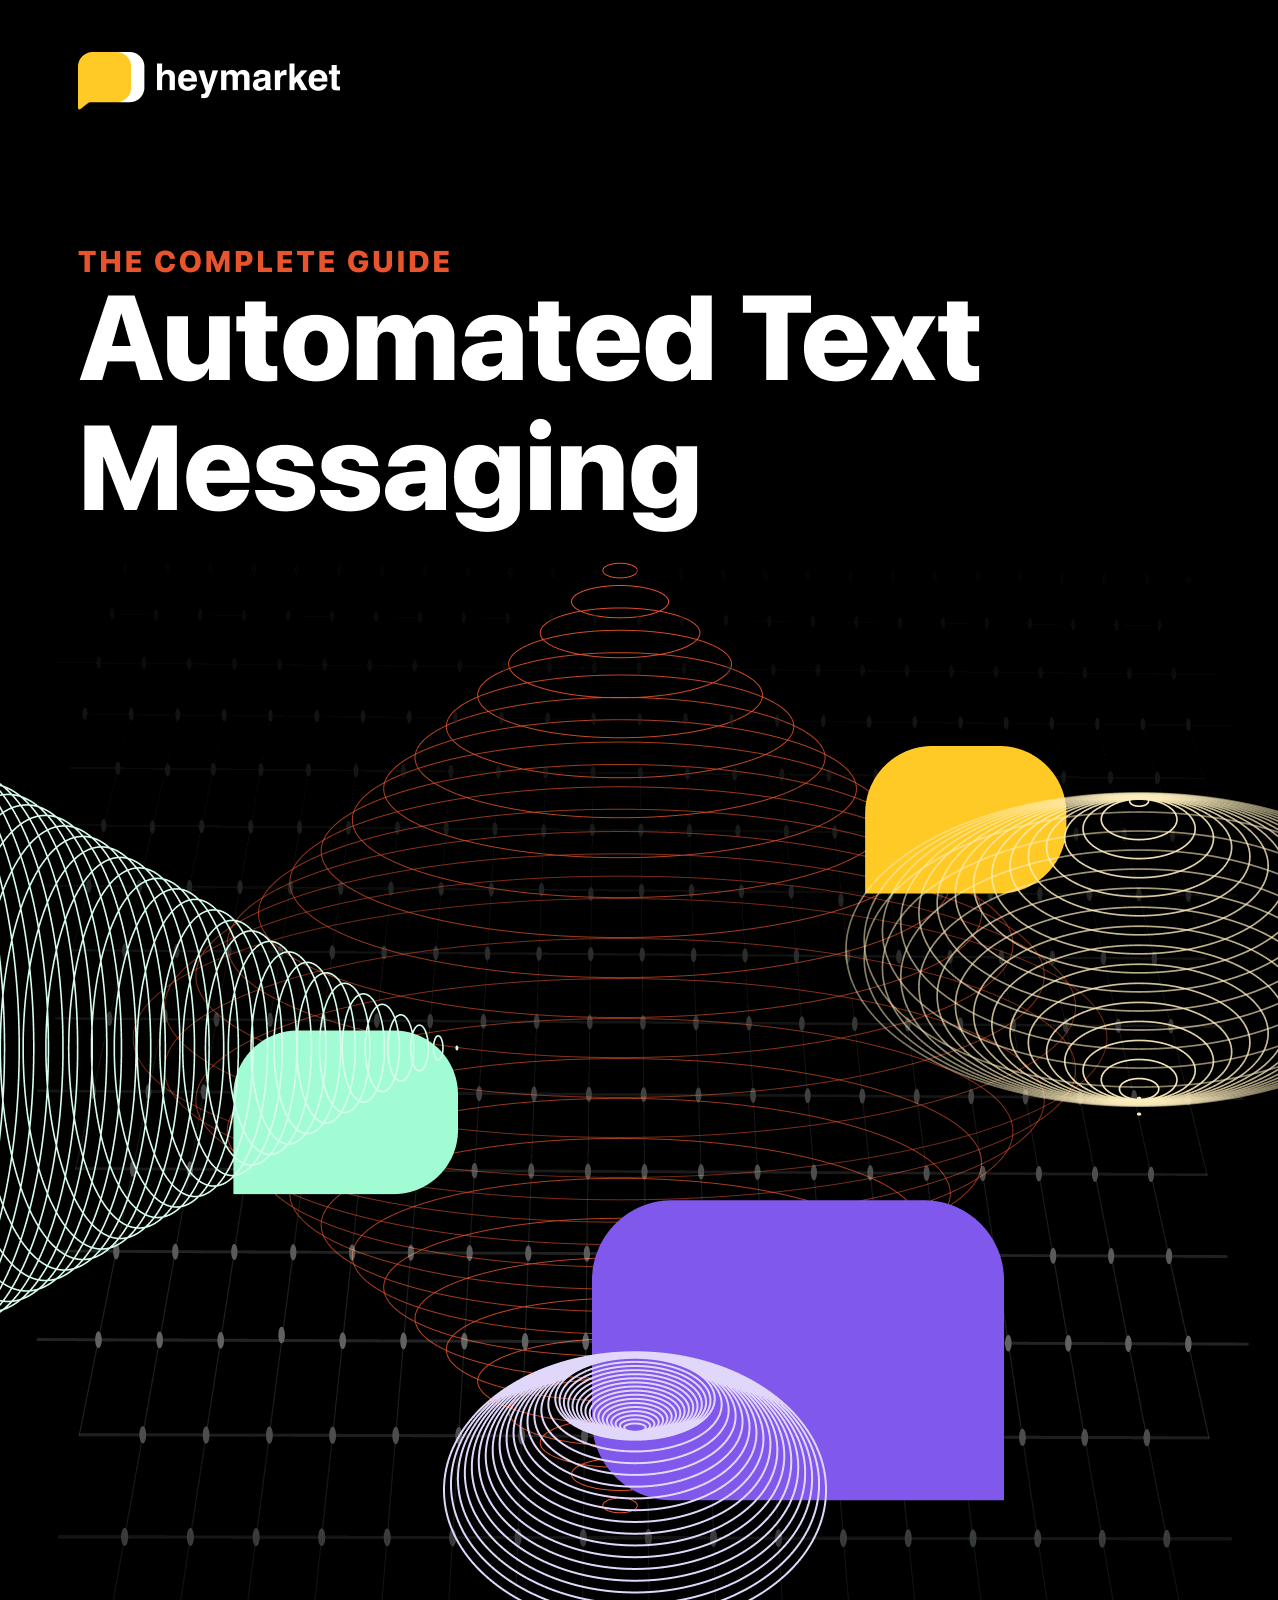 A ebook cover image with text "The complete guide Automated Text Messaging"